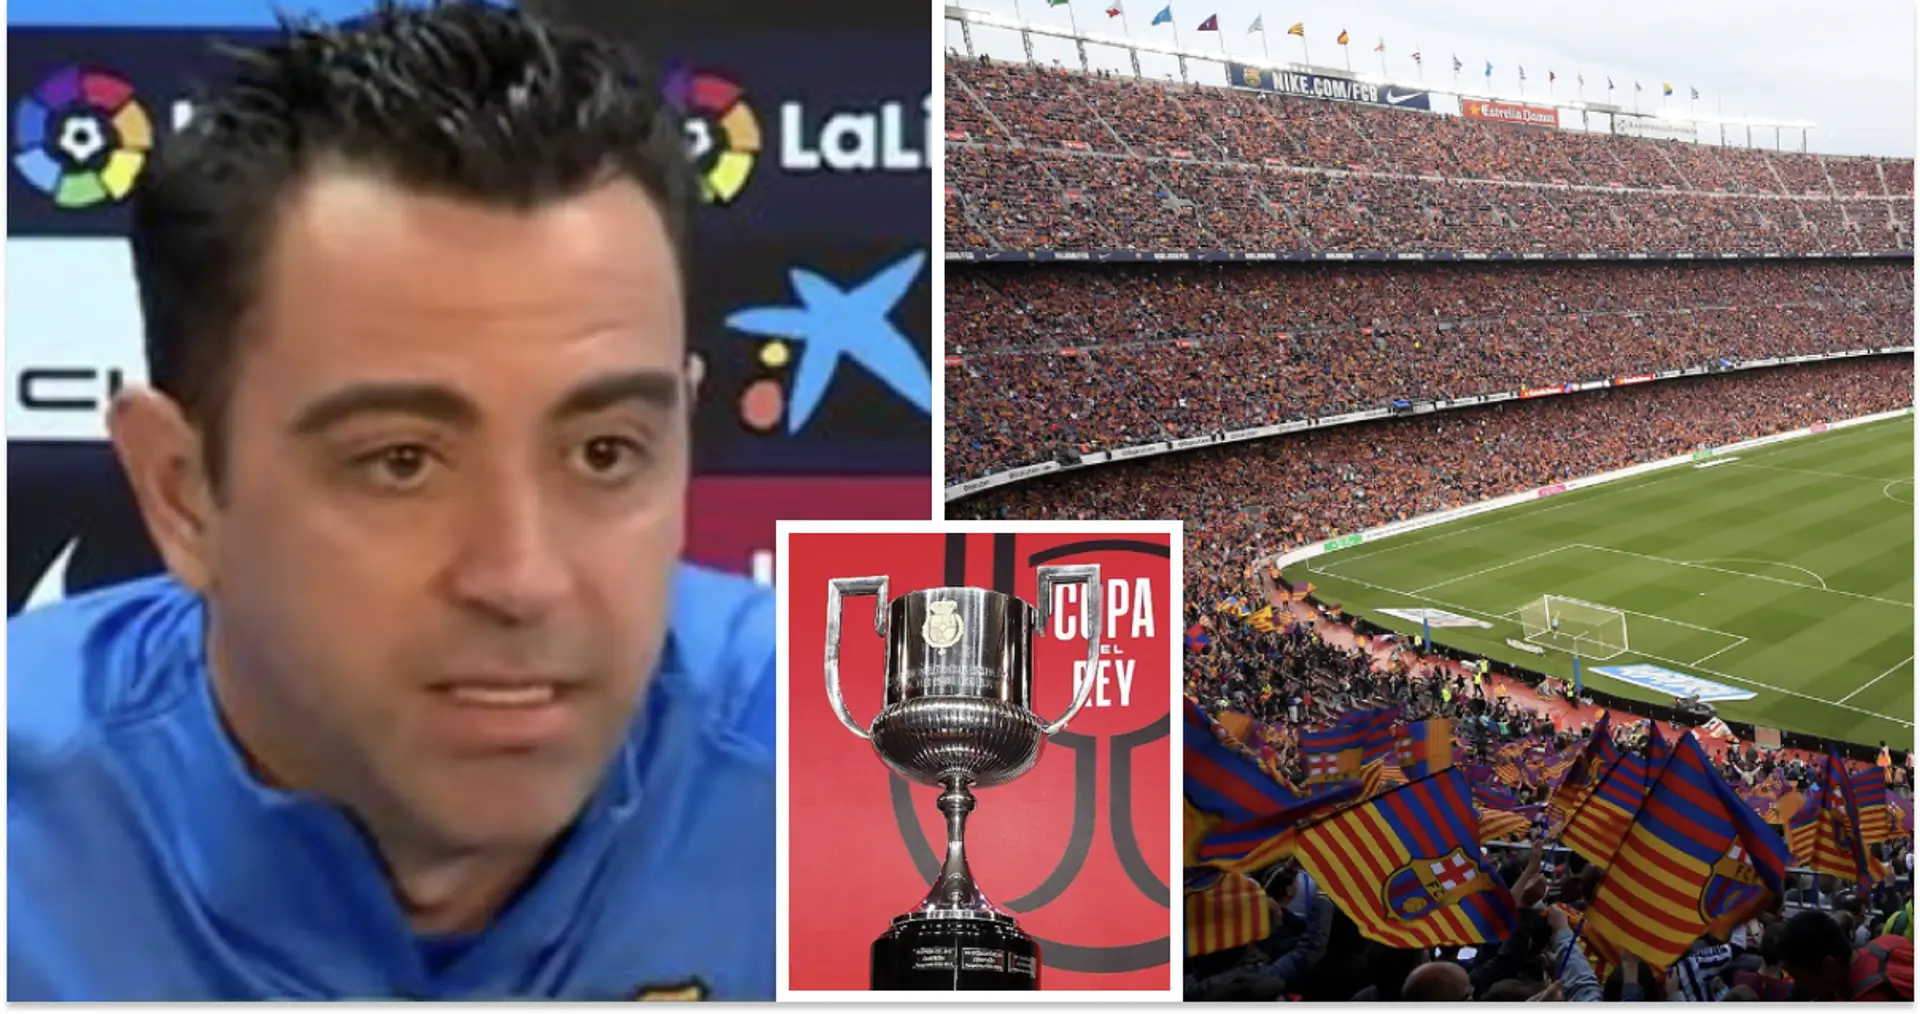 Barca's Copa Del Rey opponent named -- their stadium holds 40 times fewer people than Camp Nou